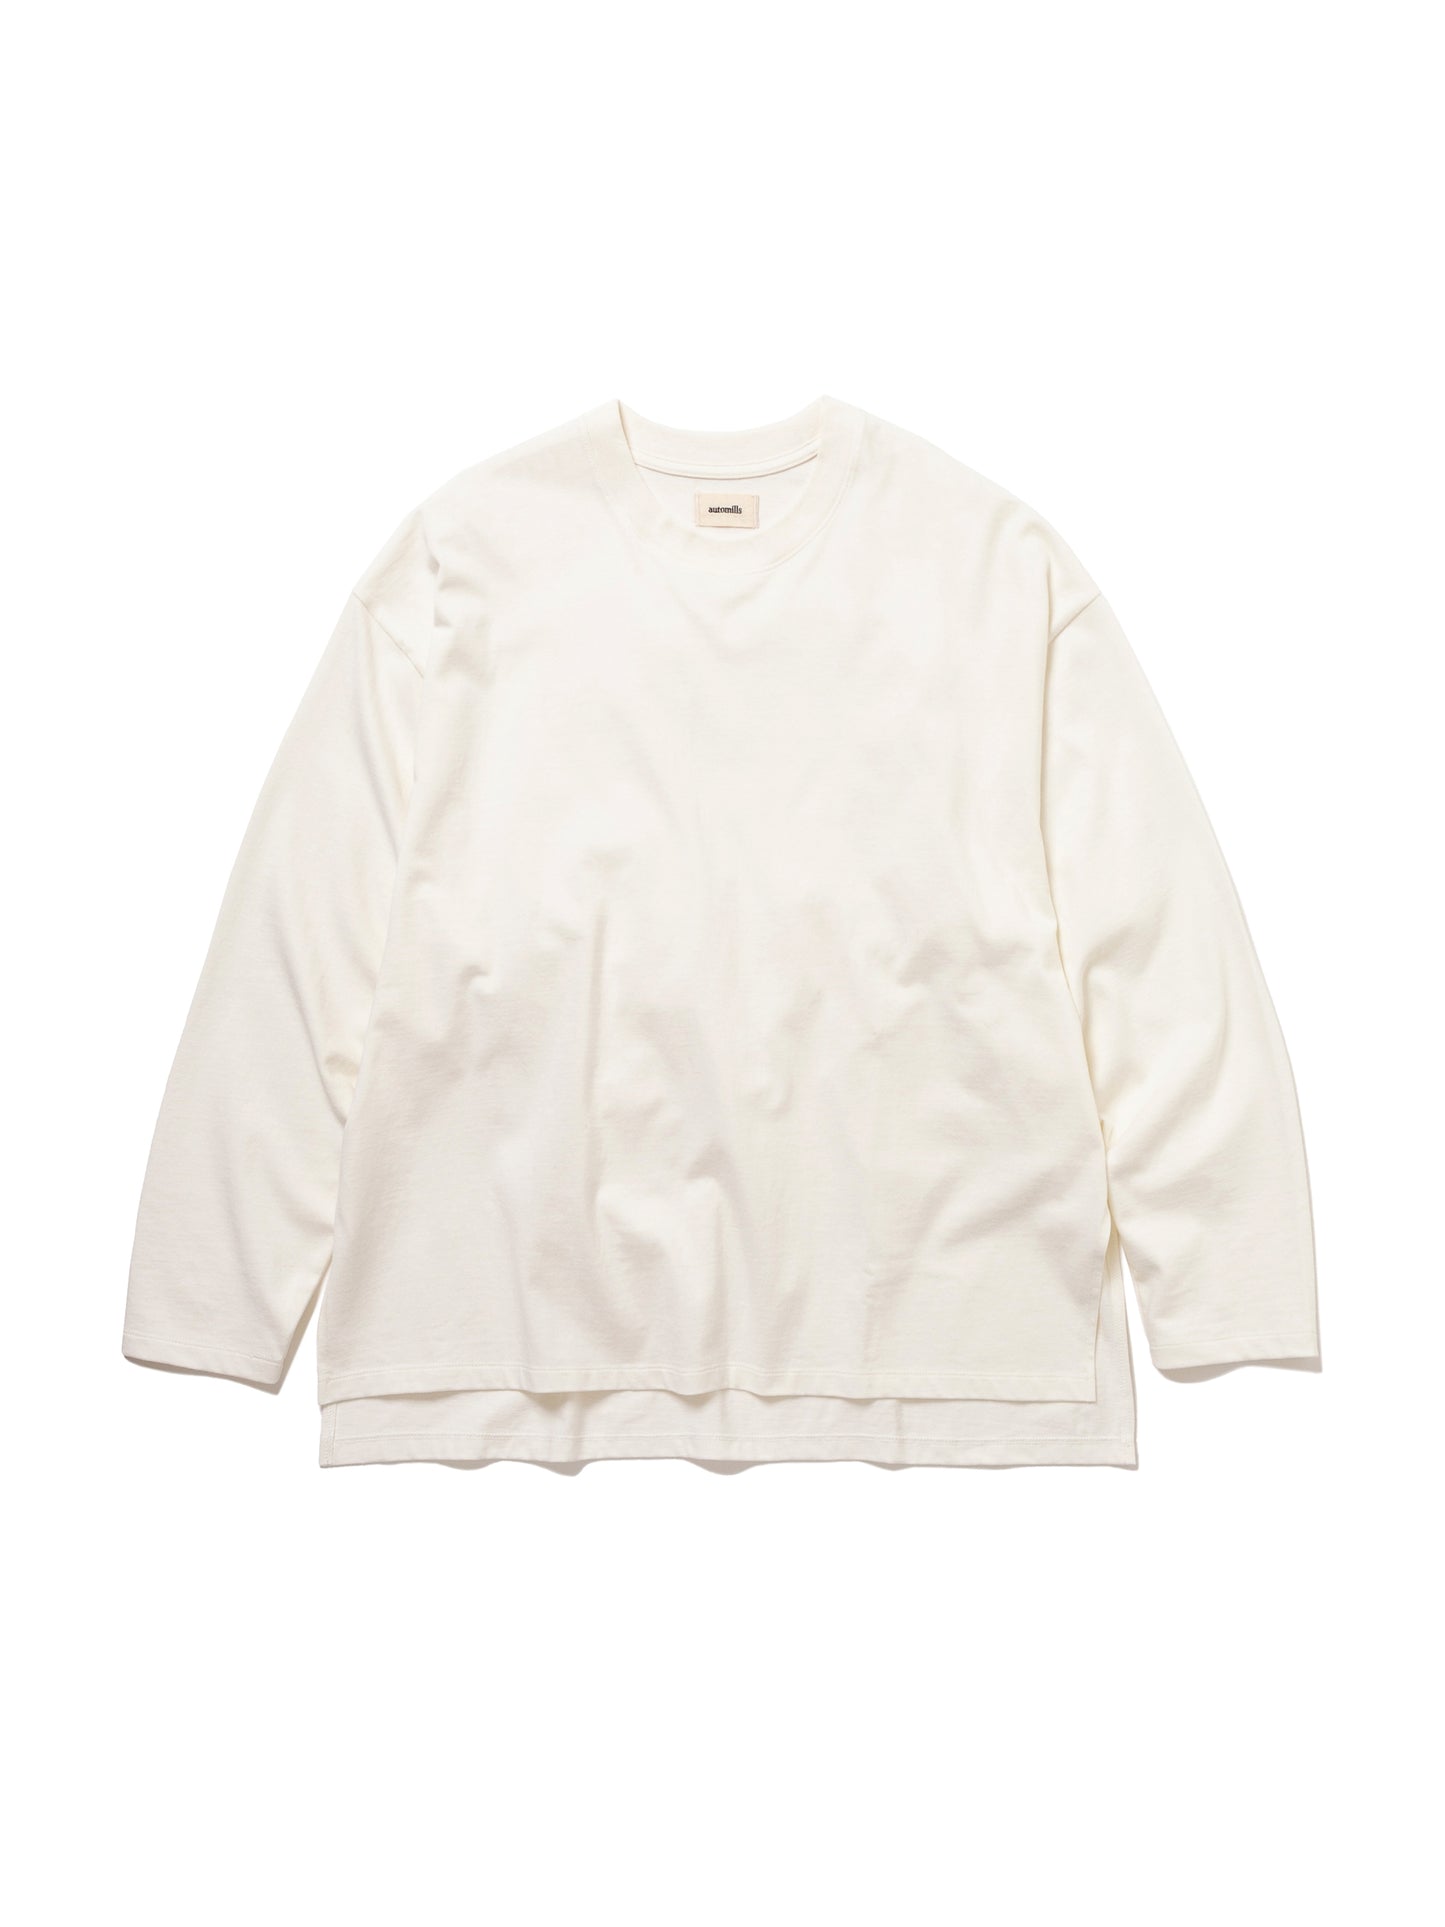 BAGGY L/S TEE ORGANIC COTTON JERSEY AM-C0003 O.White